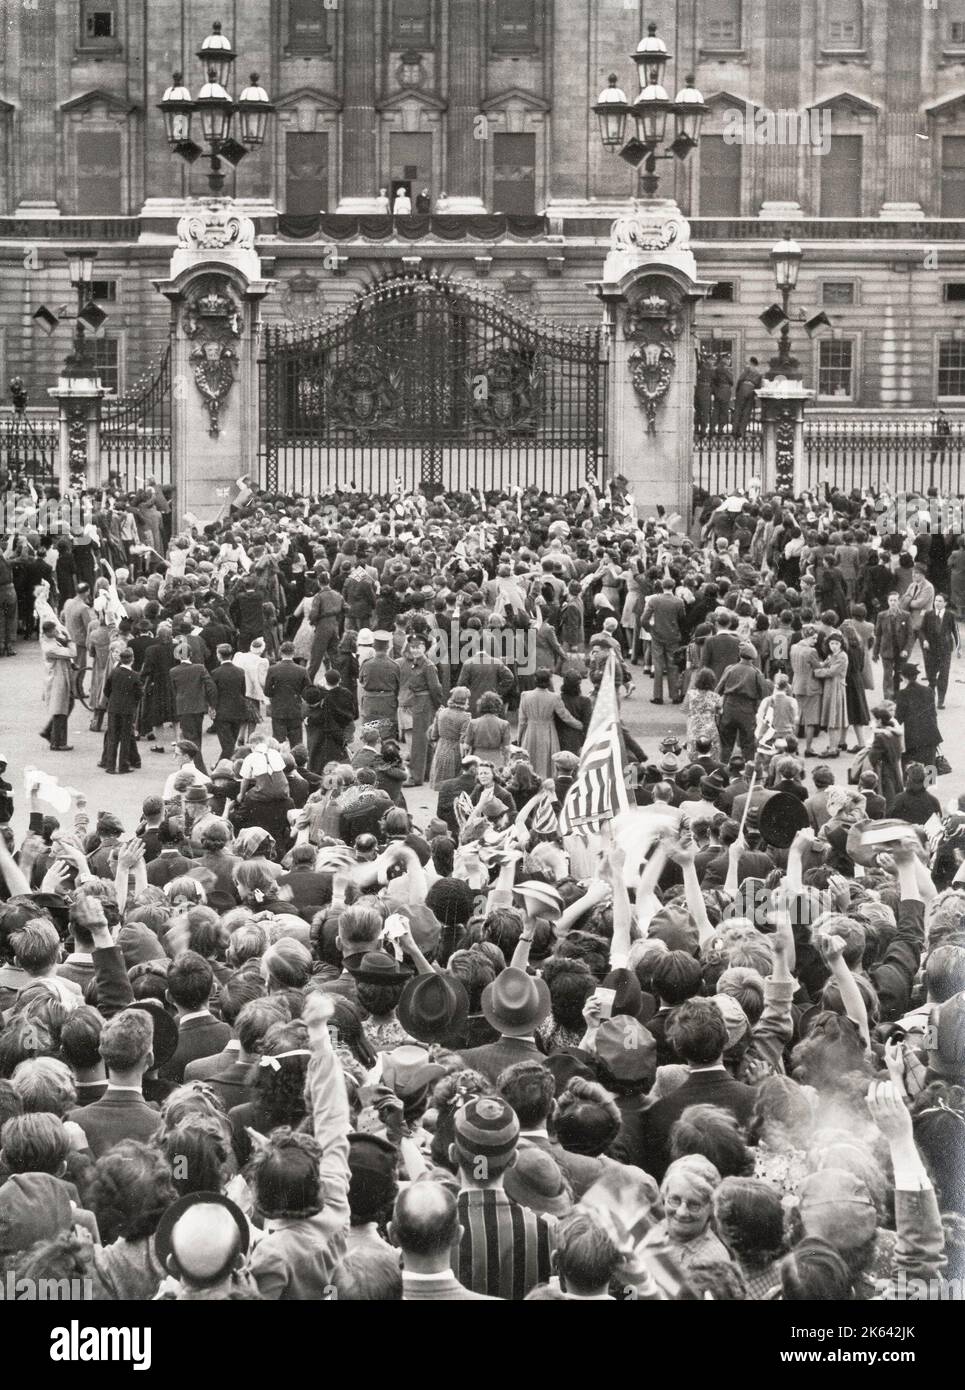 World War II vintage photograph - VJ Day - victory over Japan. Crowd outside Buckingham Palace waiting for the royal family. Stock Photo